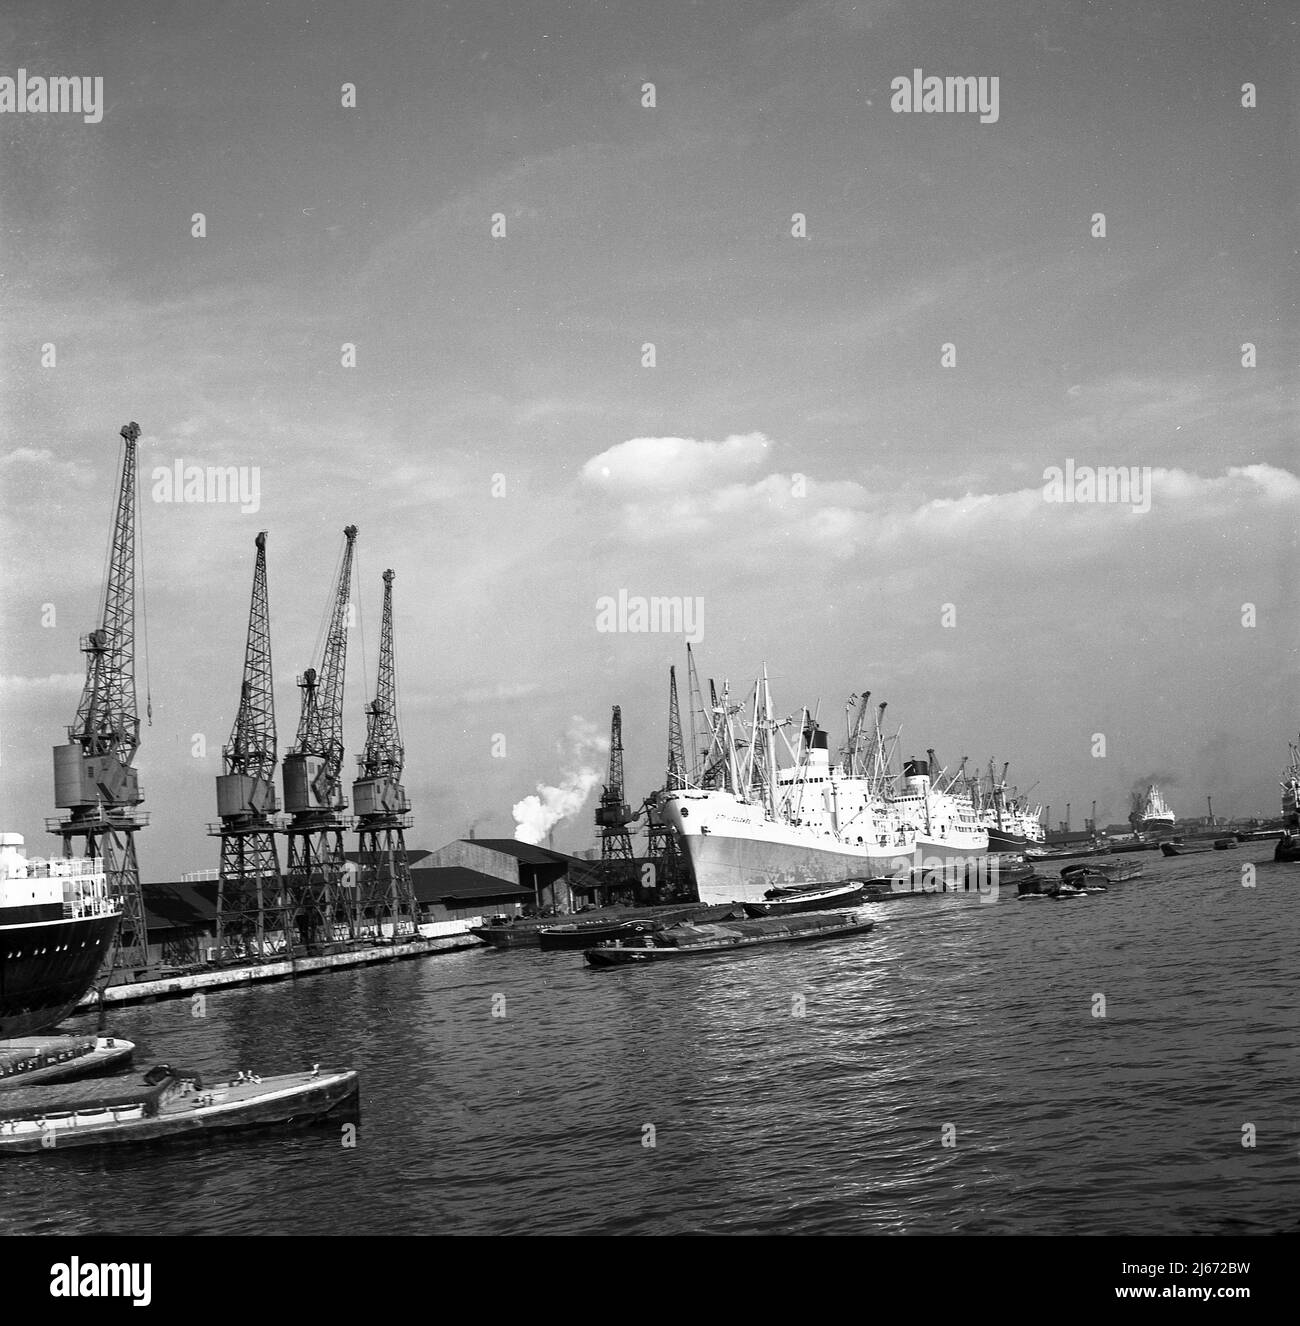 1960s, historcial, Port of London, large steam drived cargo ships moored up beside the dockside cranes, East London docks, England, UK. Stock Photo